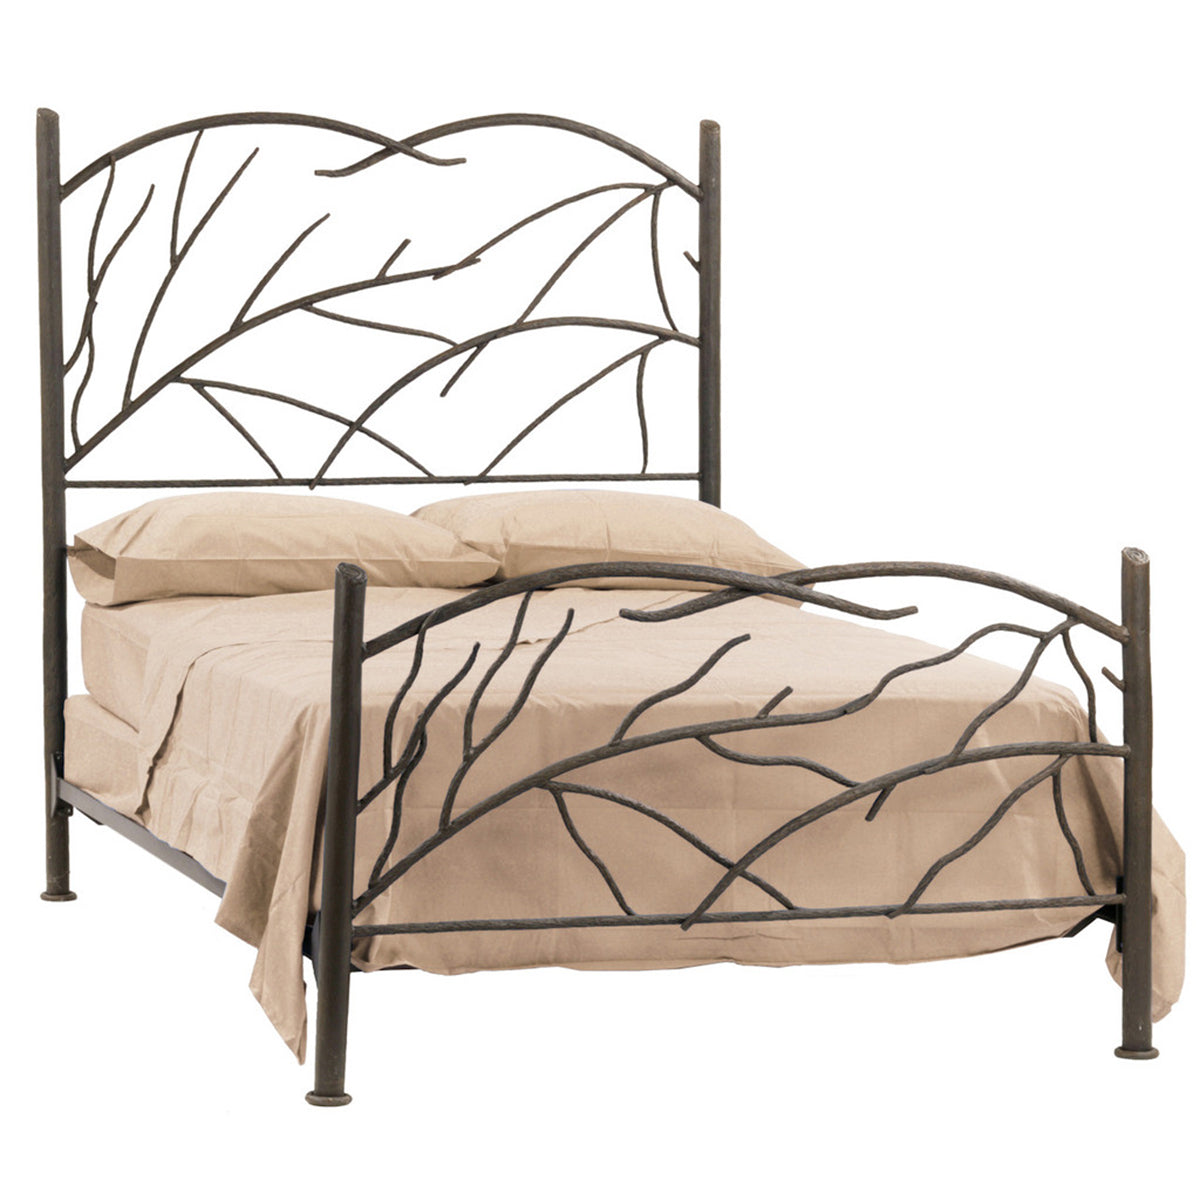 Norfork Wrought Iron Bed